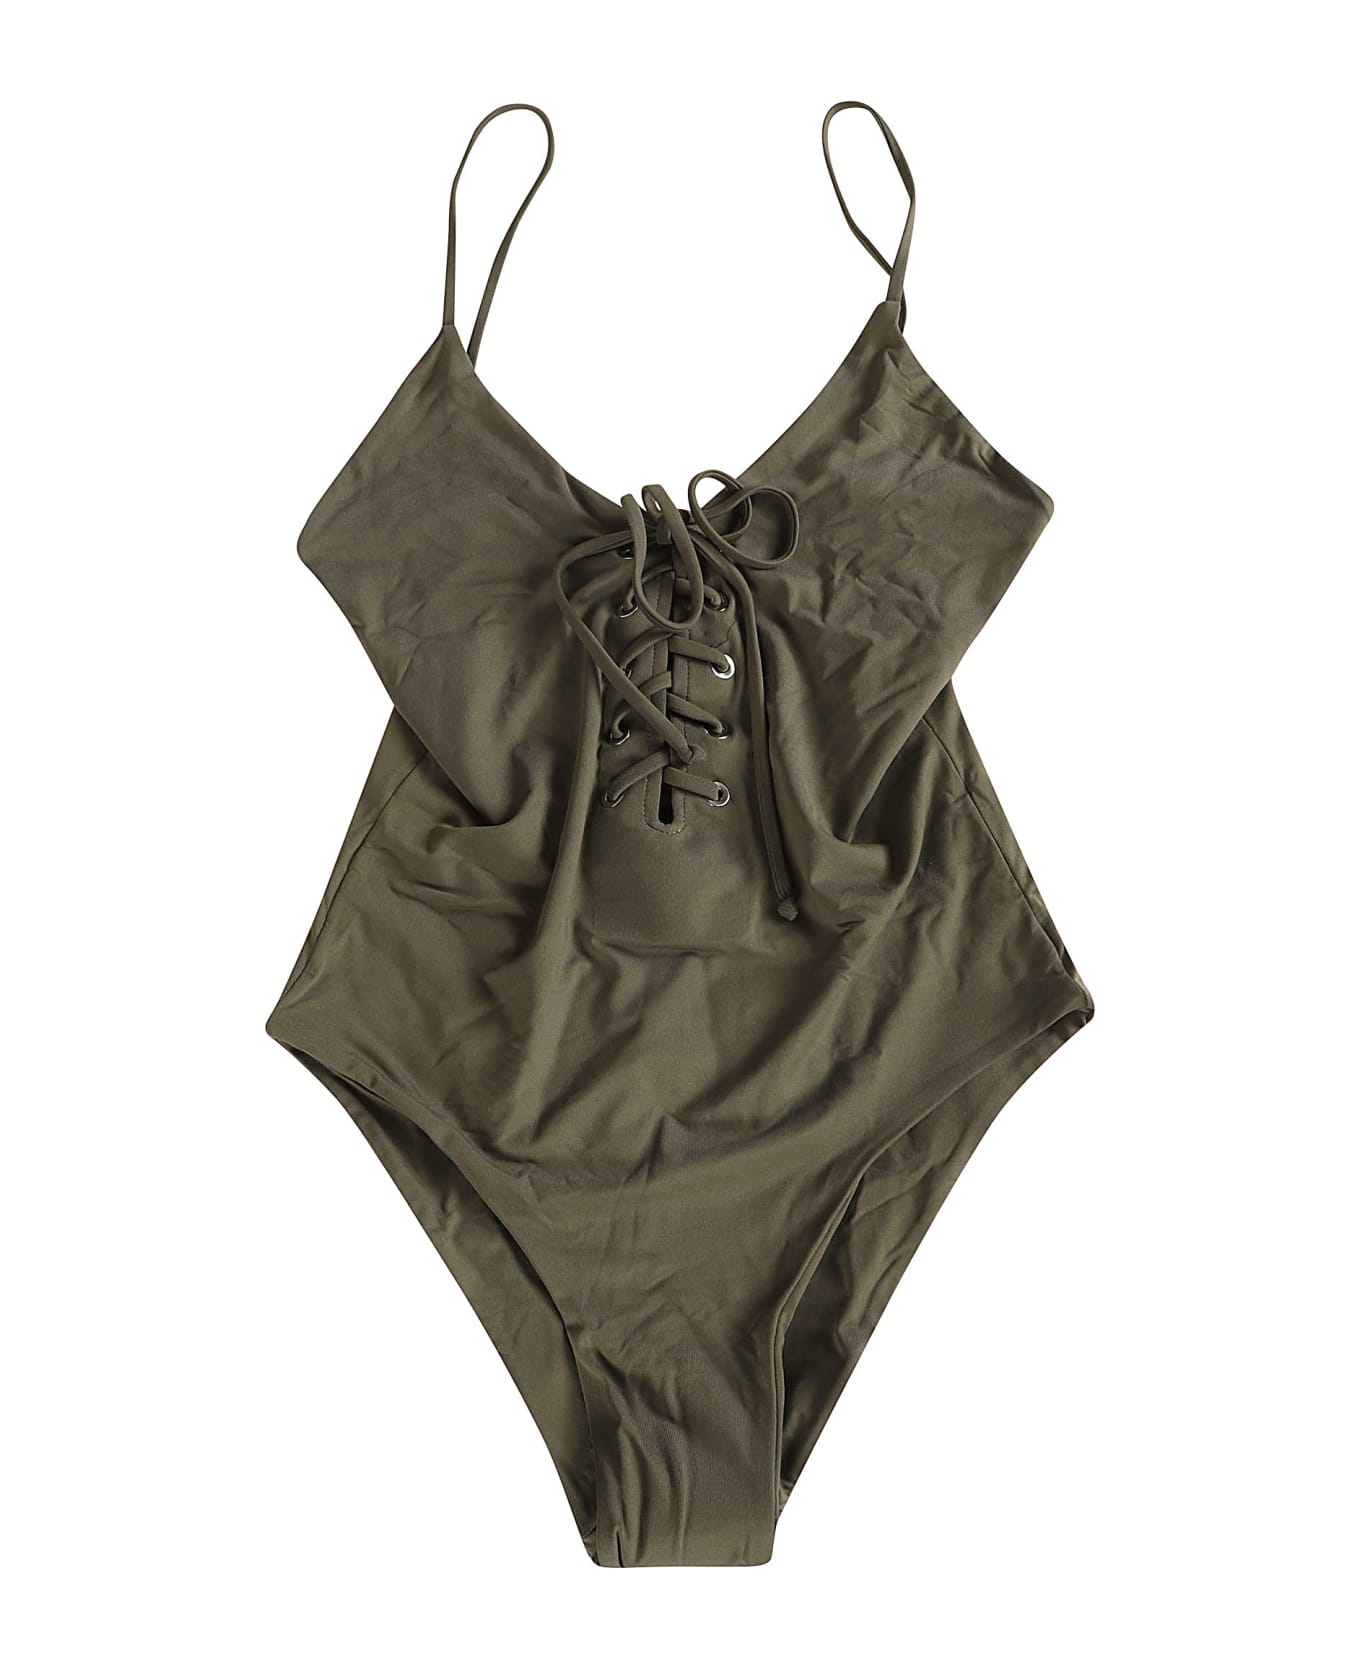 Federica Tosi Lace-tie Body - Olive